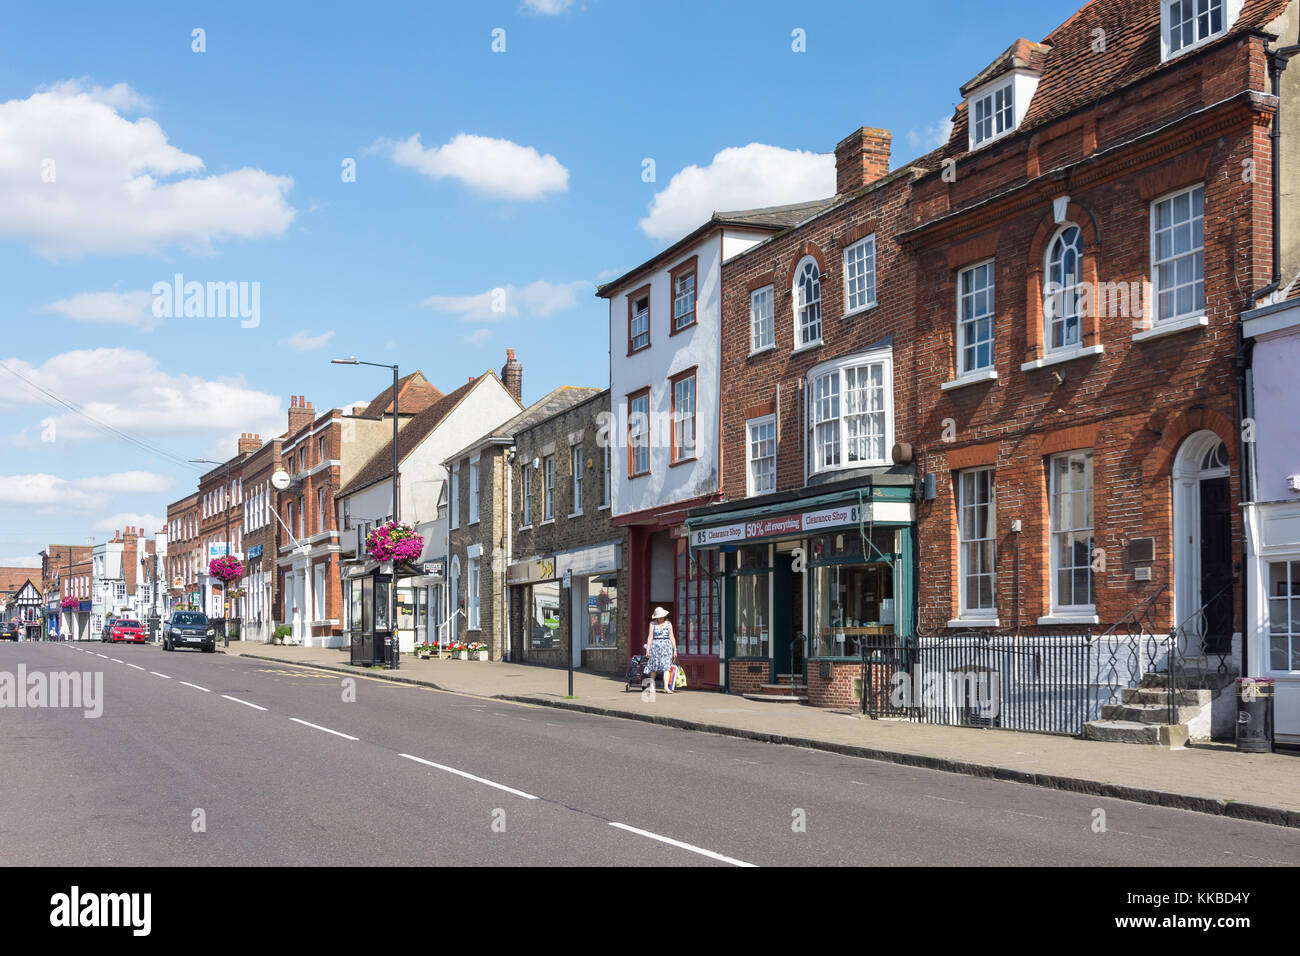 Newland Street, Witham, Essex, Angleterre, Royaume-Uni Banque D'Images